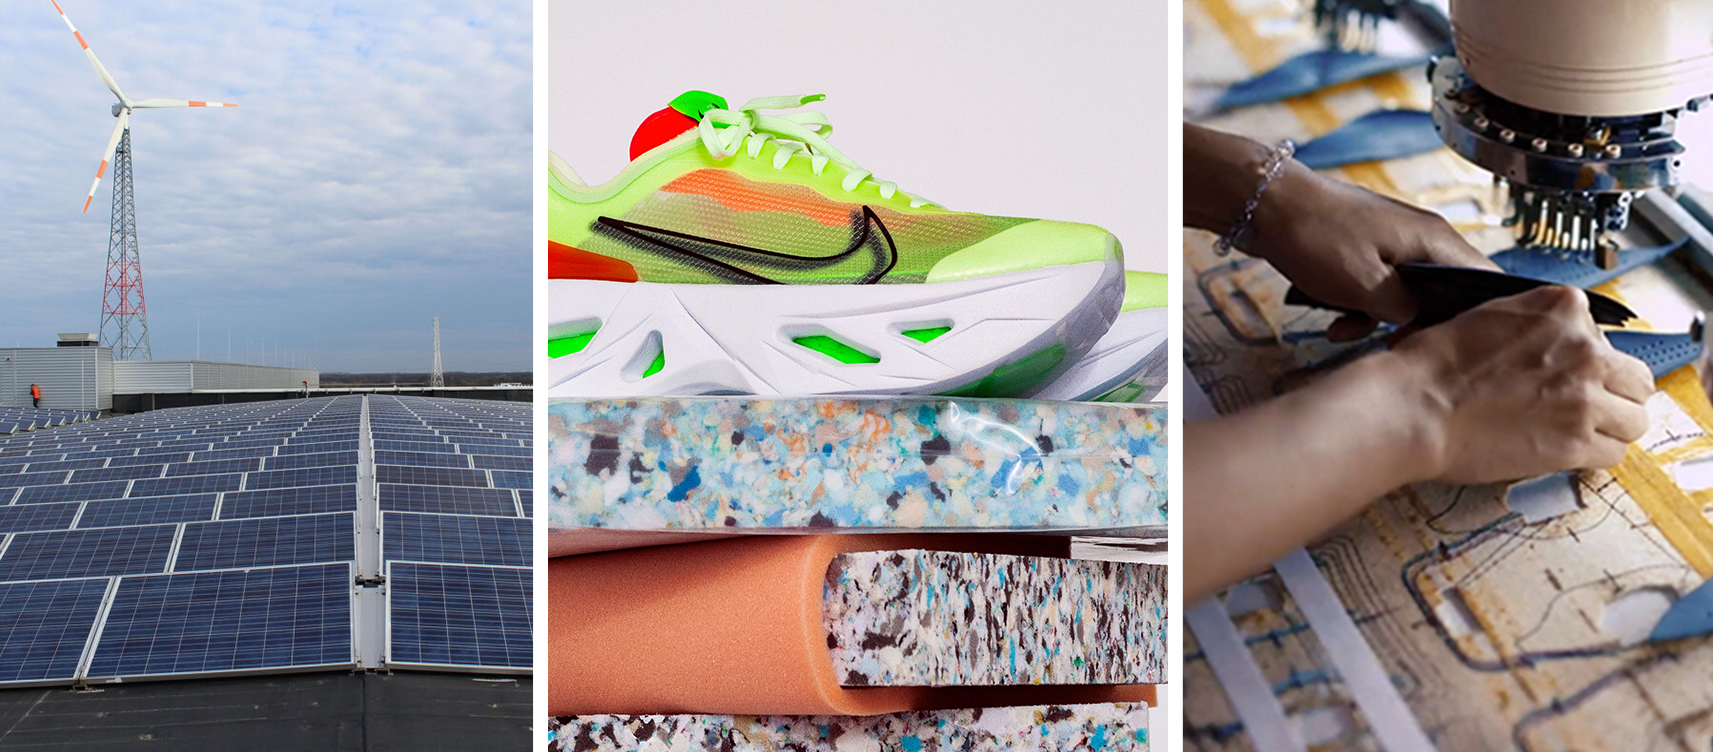 Triptych of solar panels, Nike shoes sitting on multicolored material, and an enginer writing in a notebook.